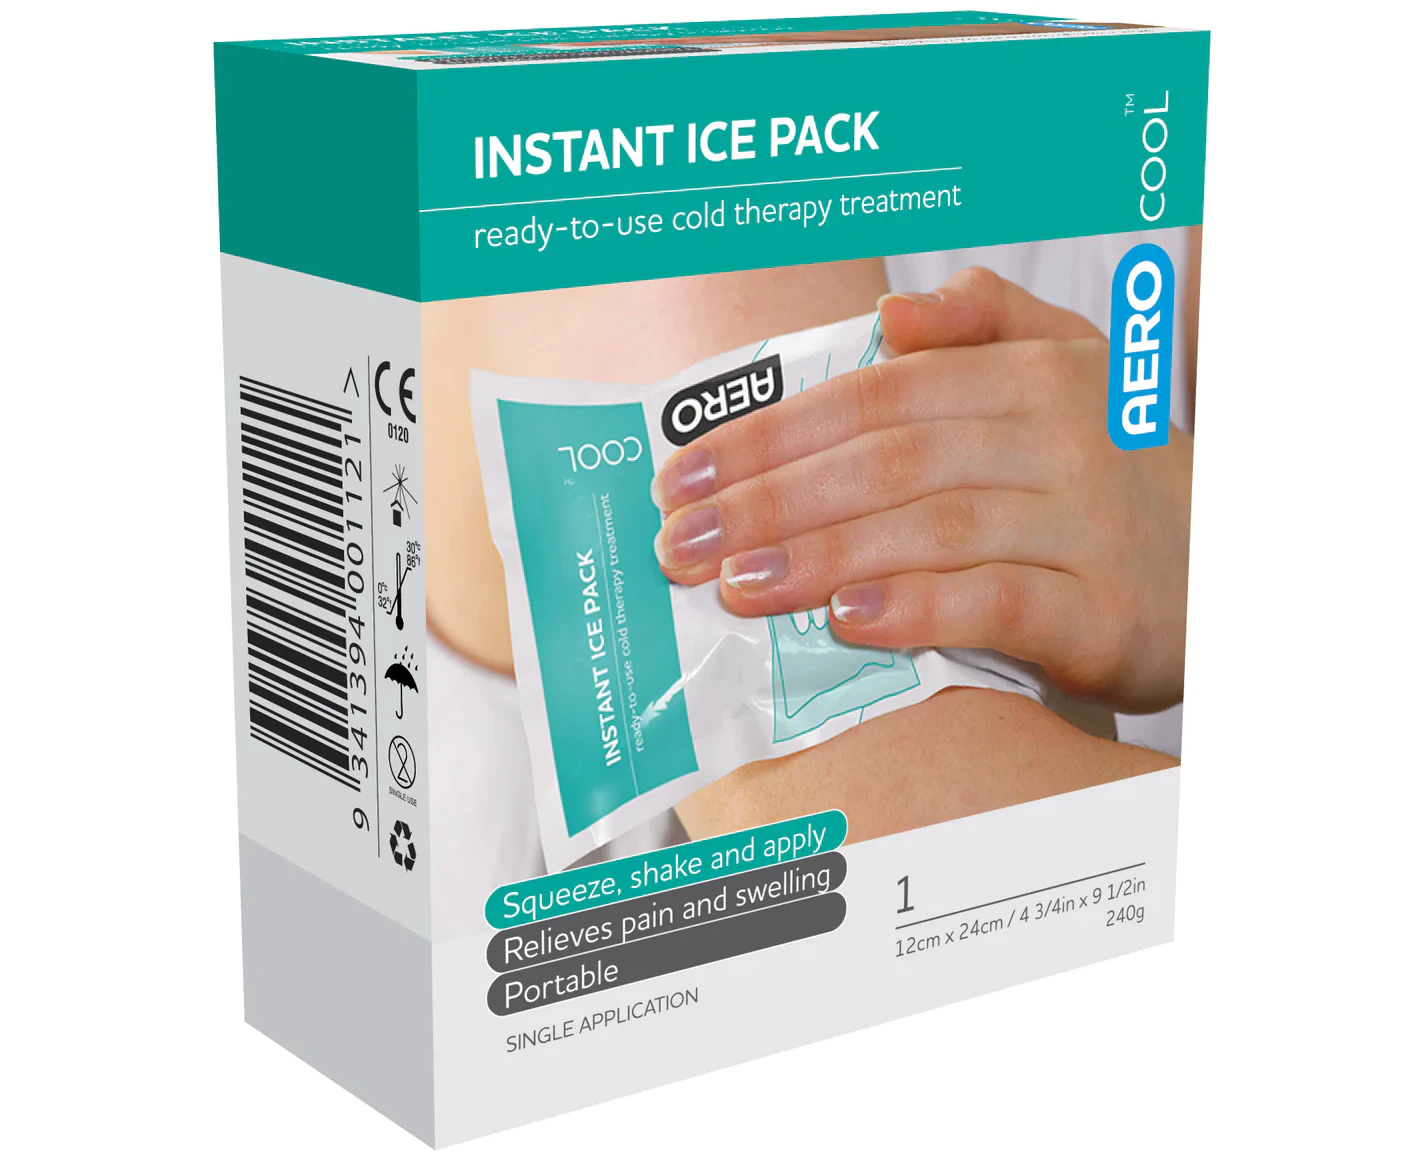 Instant Ice Pack Small Pack by Trafalgar